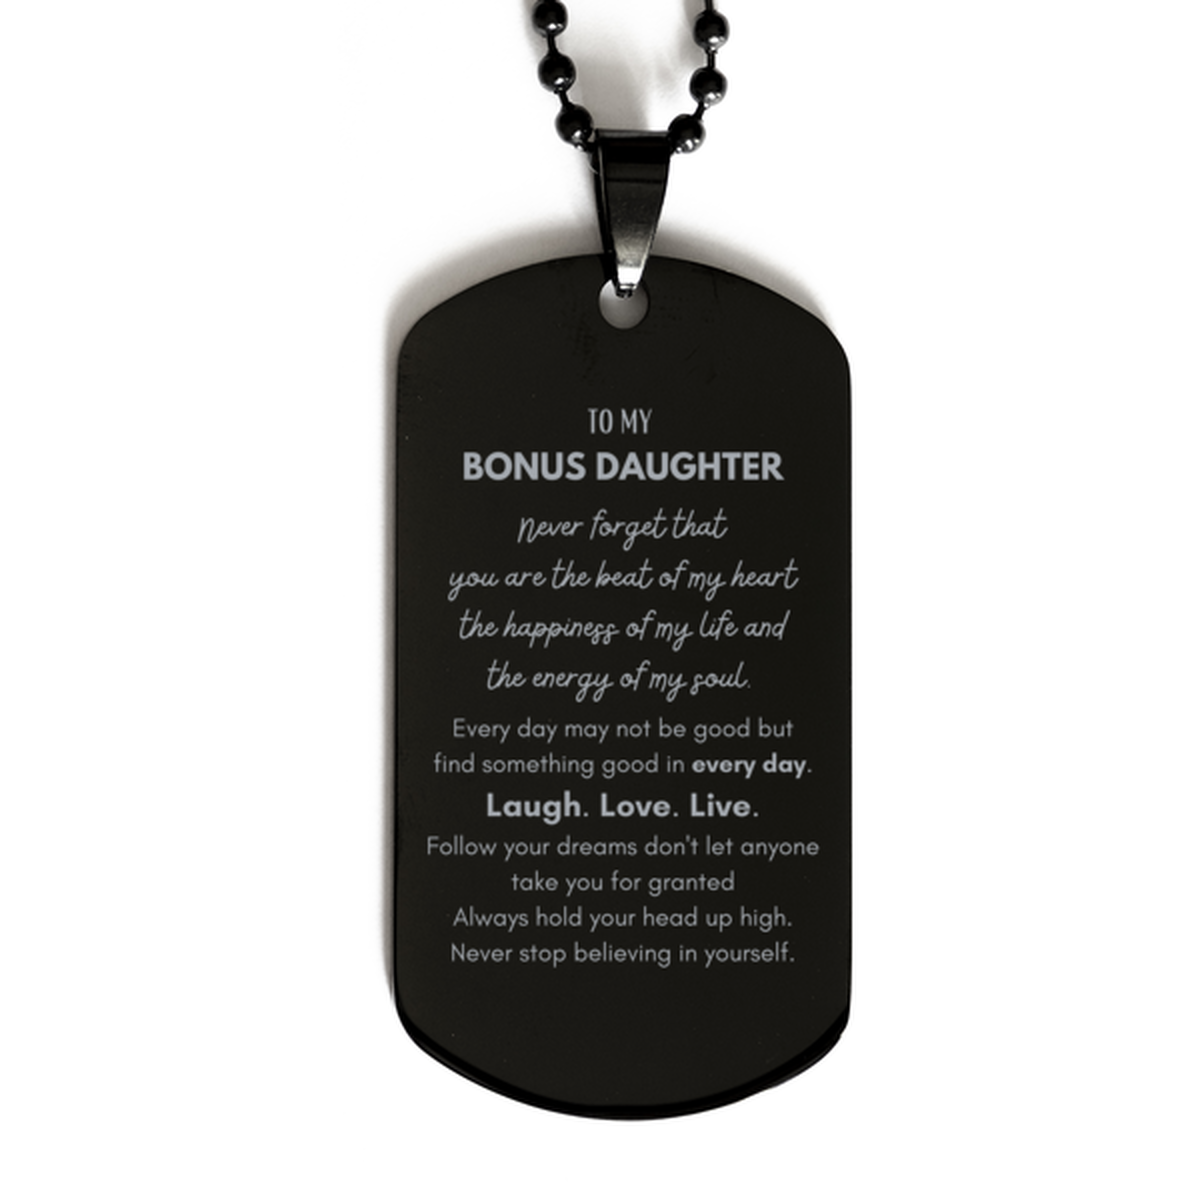 To My Bonus Daughter Dogtag Gifts, Christmas Bonus Daughter Black Dog Tag Present, Birthday Unique Motivational For Bonus Daughter, To My Bonus Daughter Never forget that you are the beat of my heart the happiness of my life and the energy of my soul